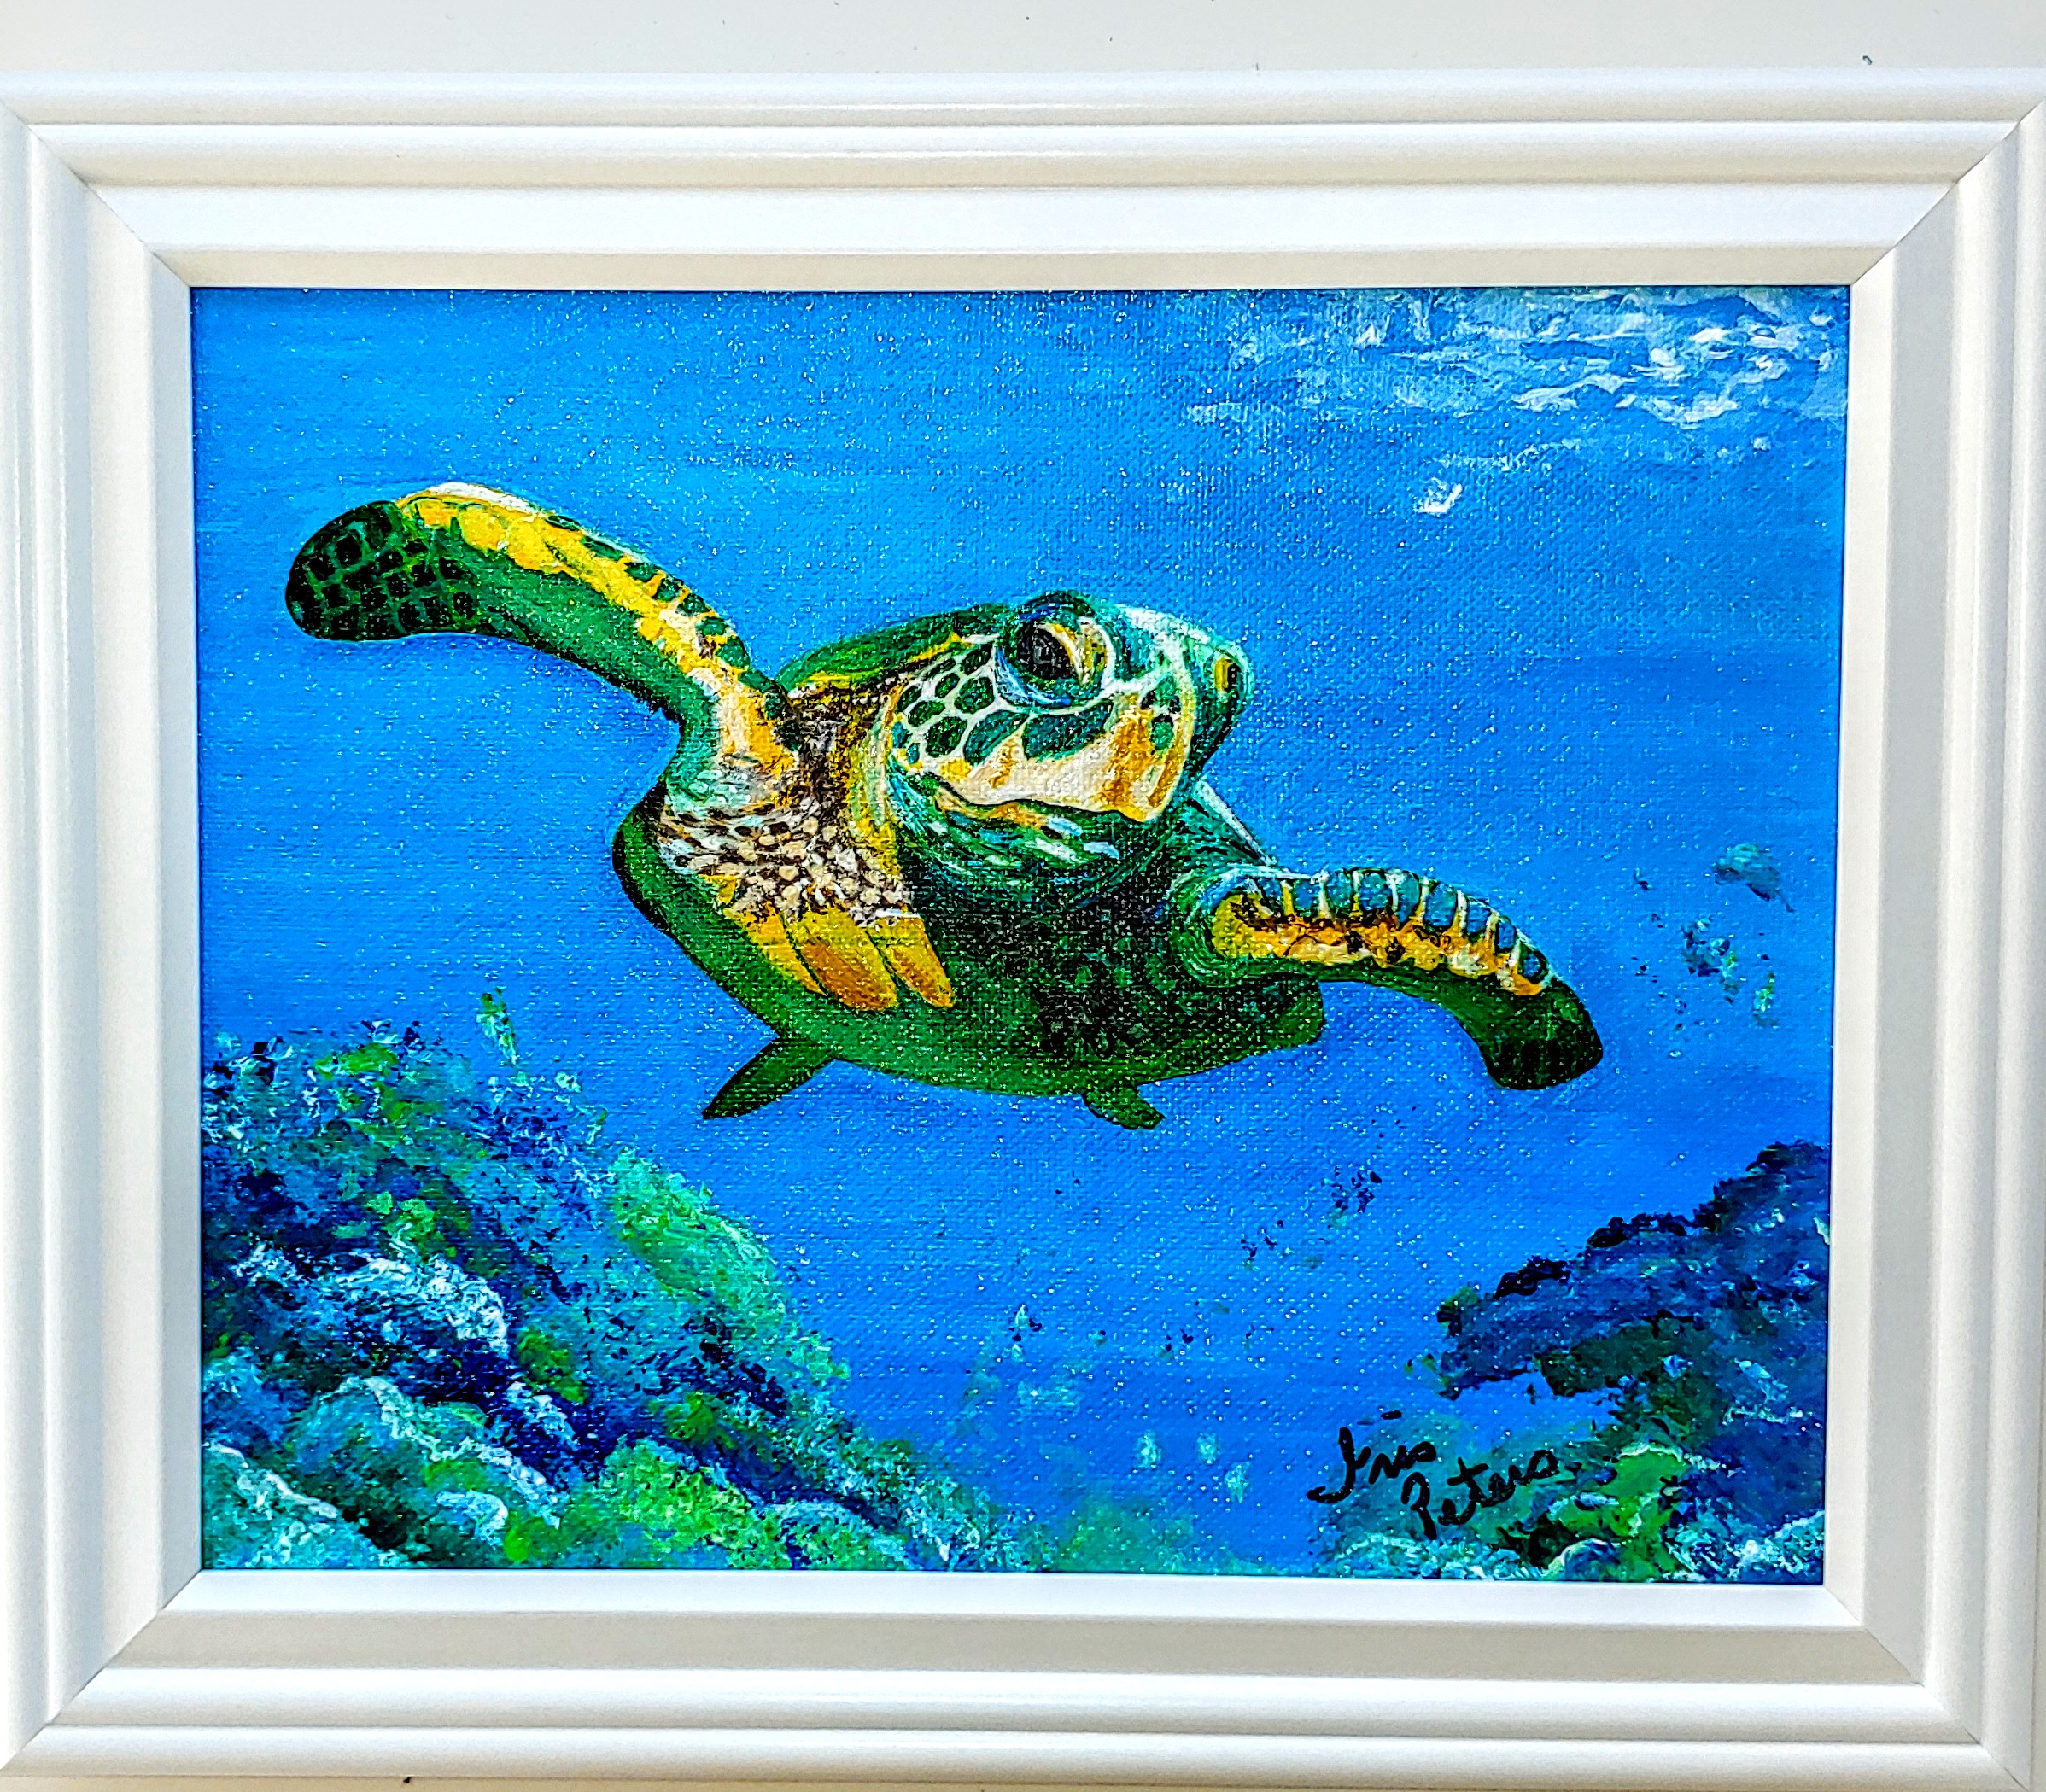 small turtle     10 x 8  $60